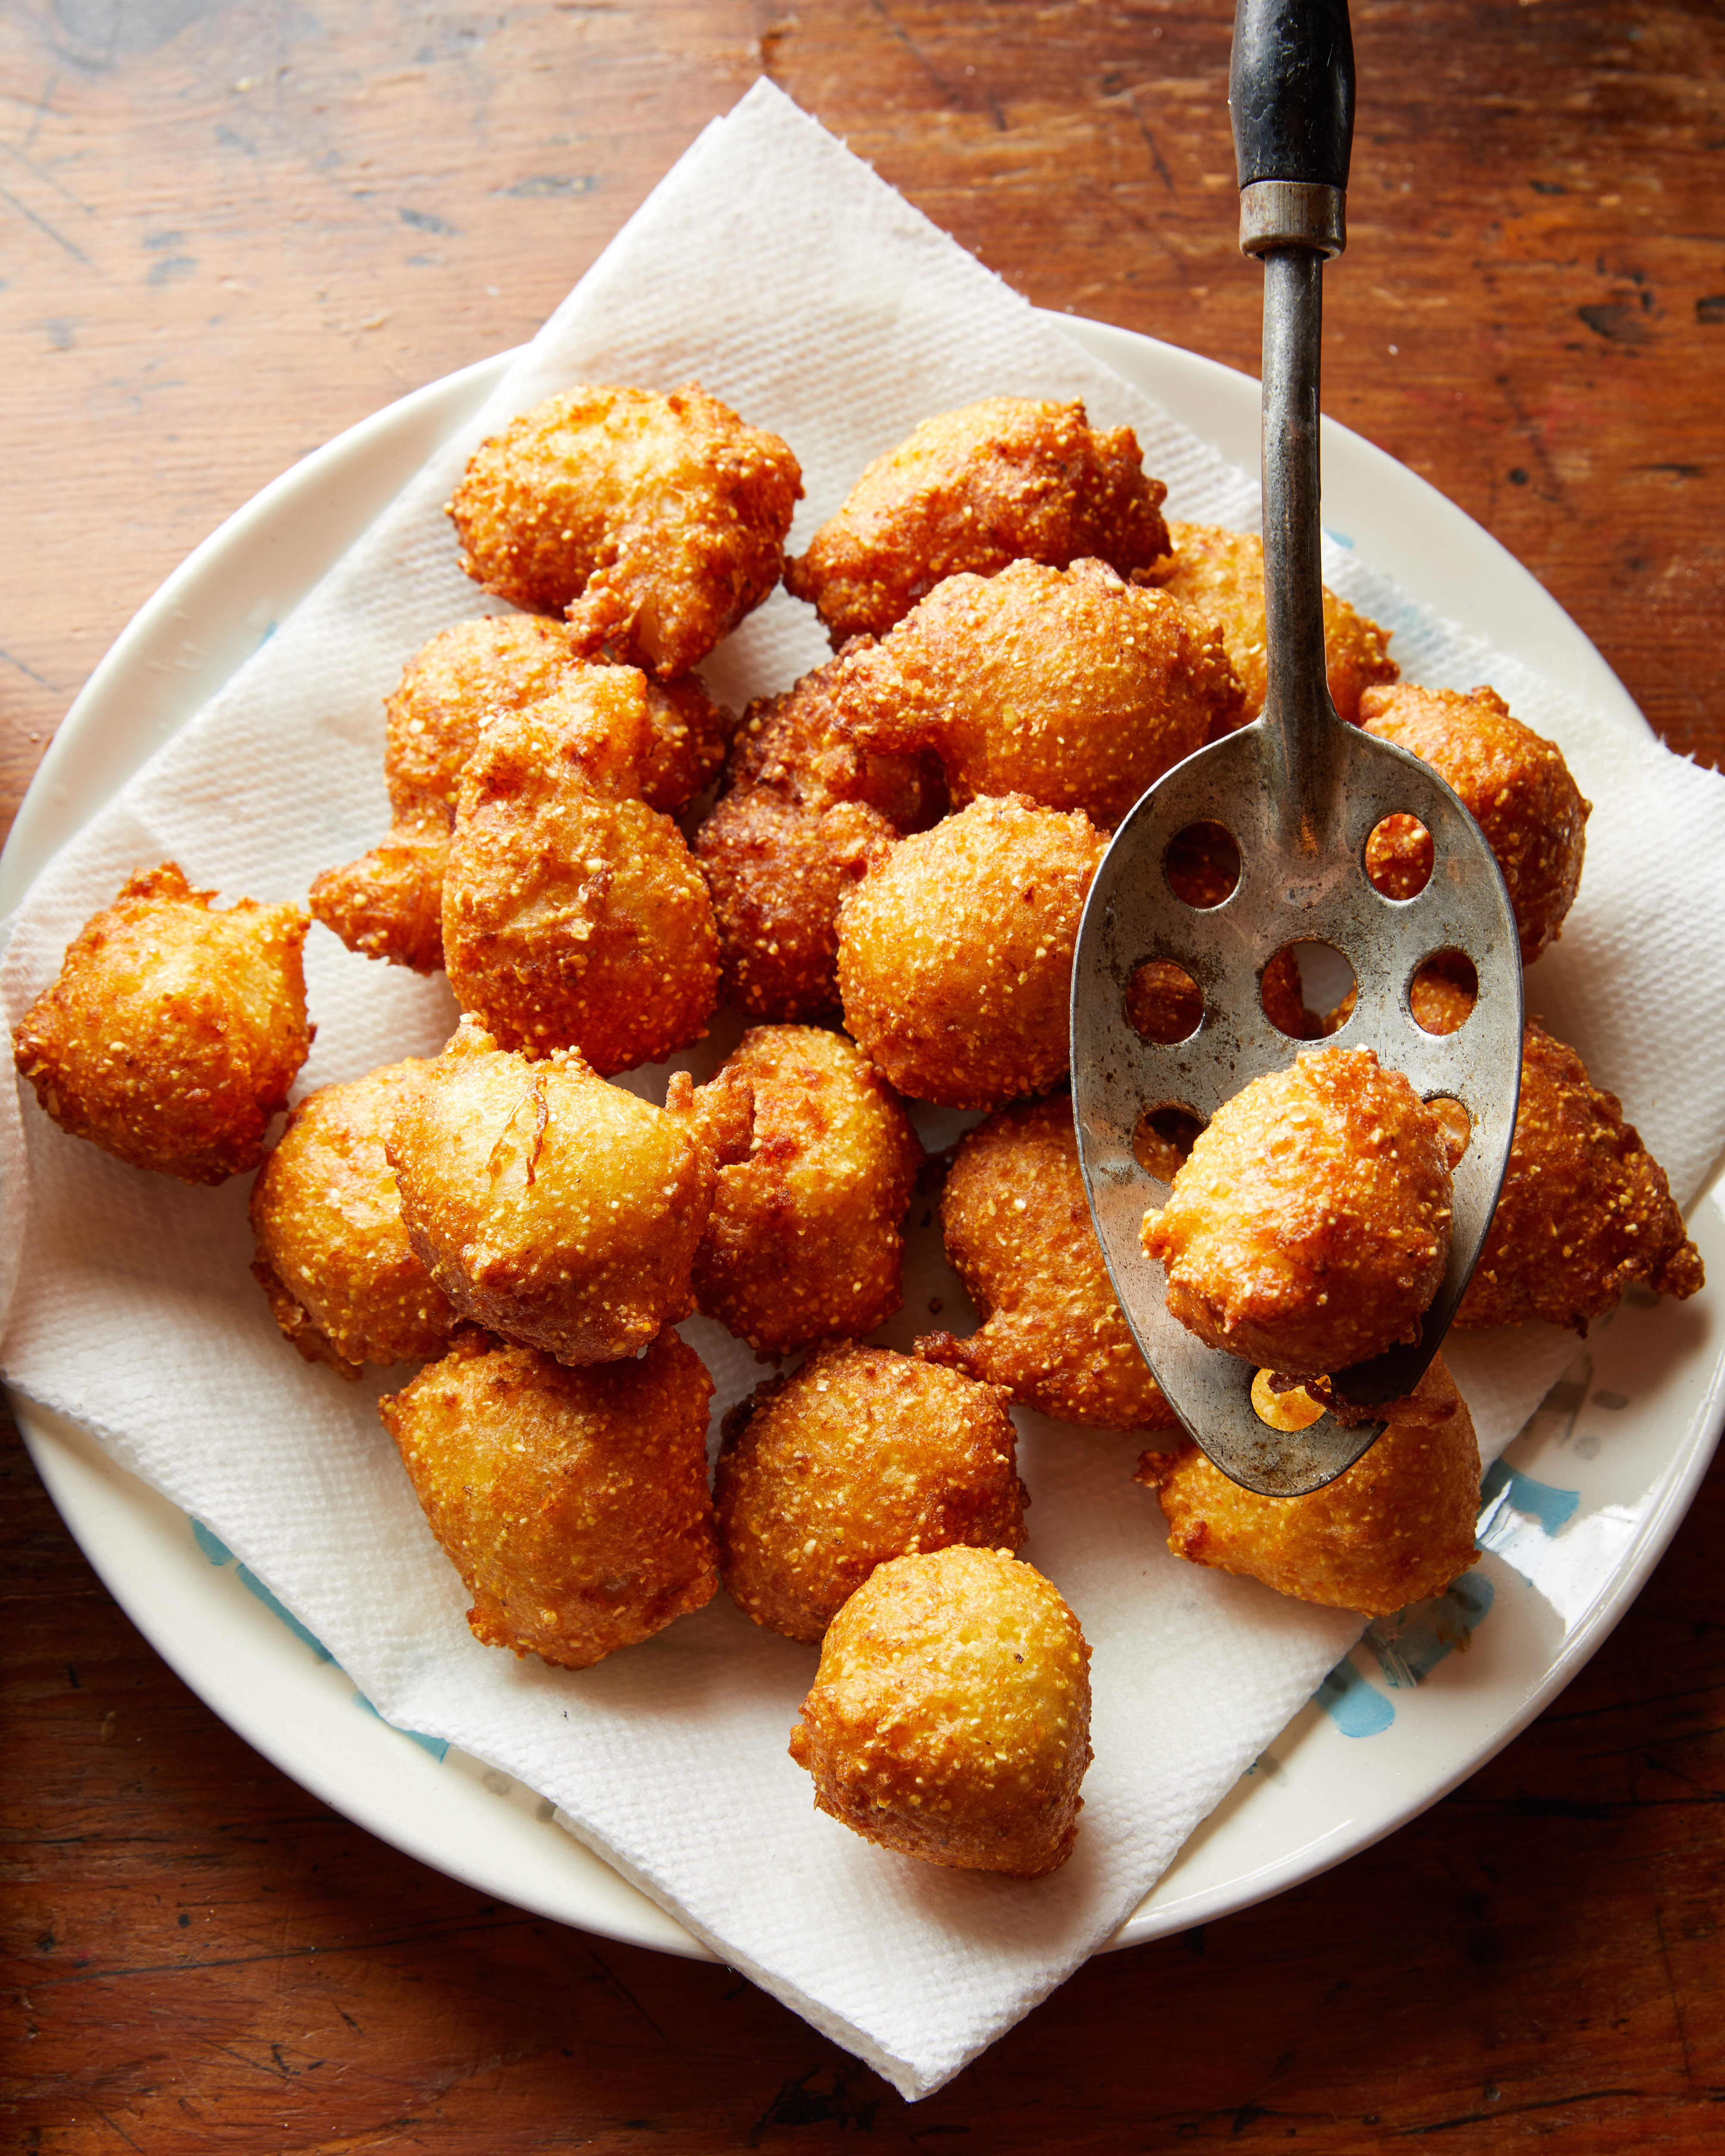 https://cdn.apartmenttherapy.info/image/upload/v1594843031/k/Photo/Recipes/2020-07-how-to-make-the-best-southern-hushpuppies/Kitchn_HowTo_SouthernHushPuppy_054.jpg